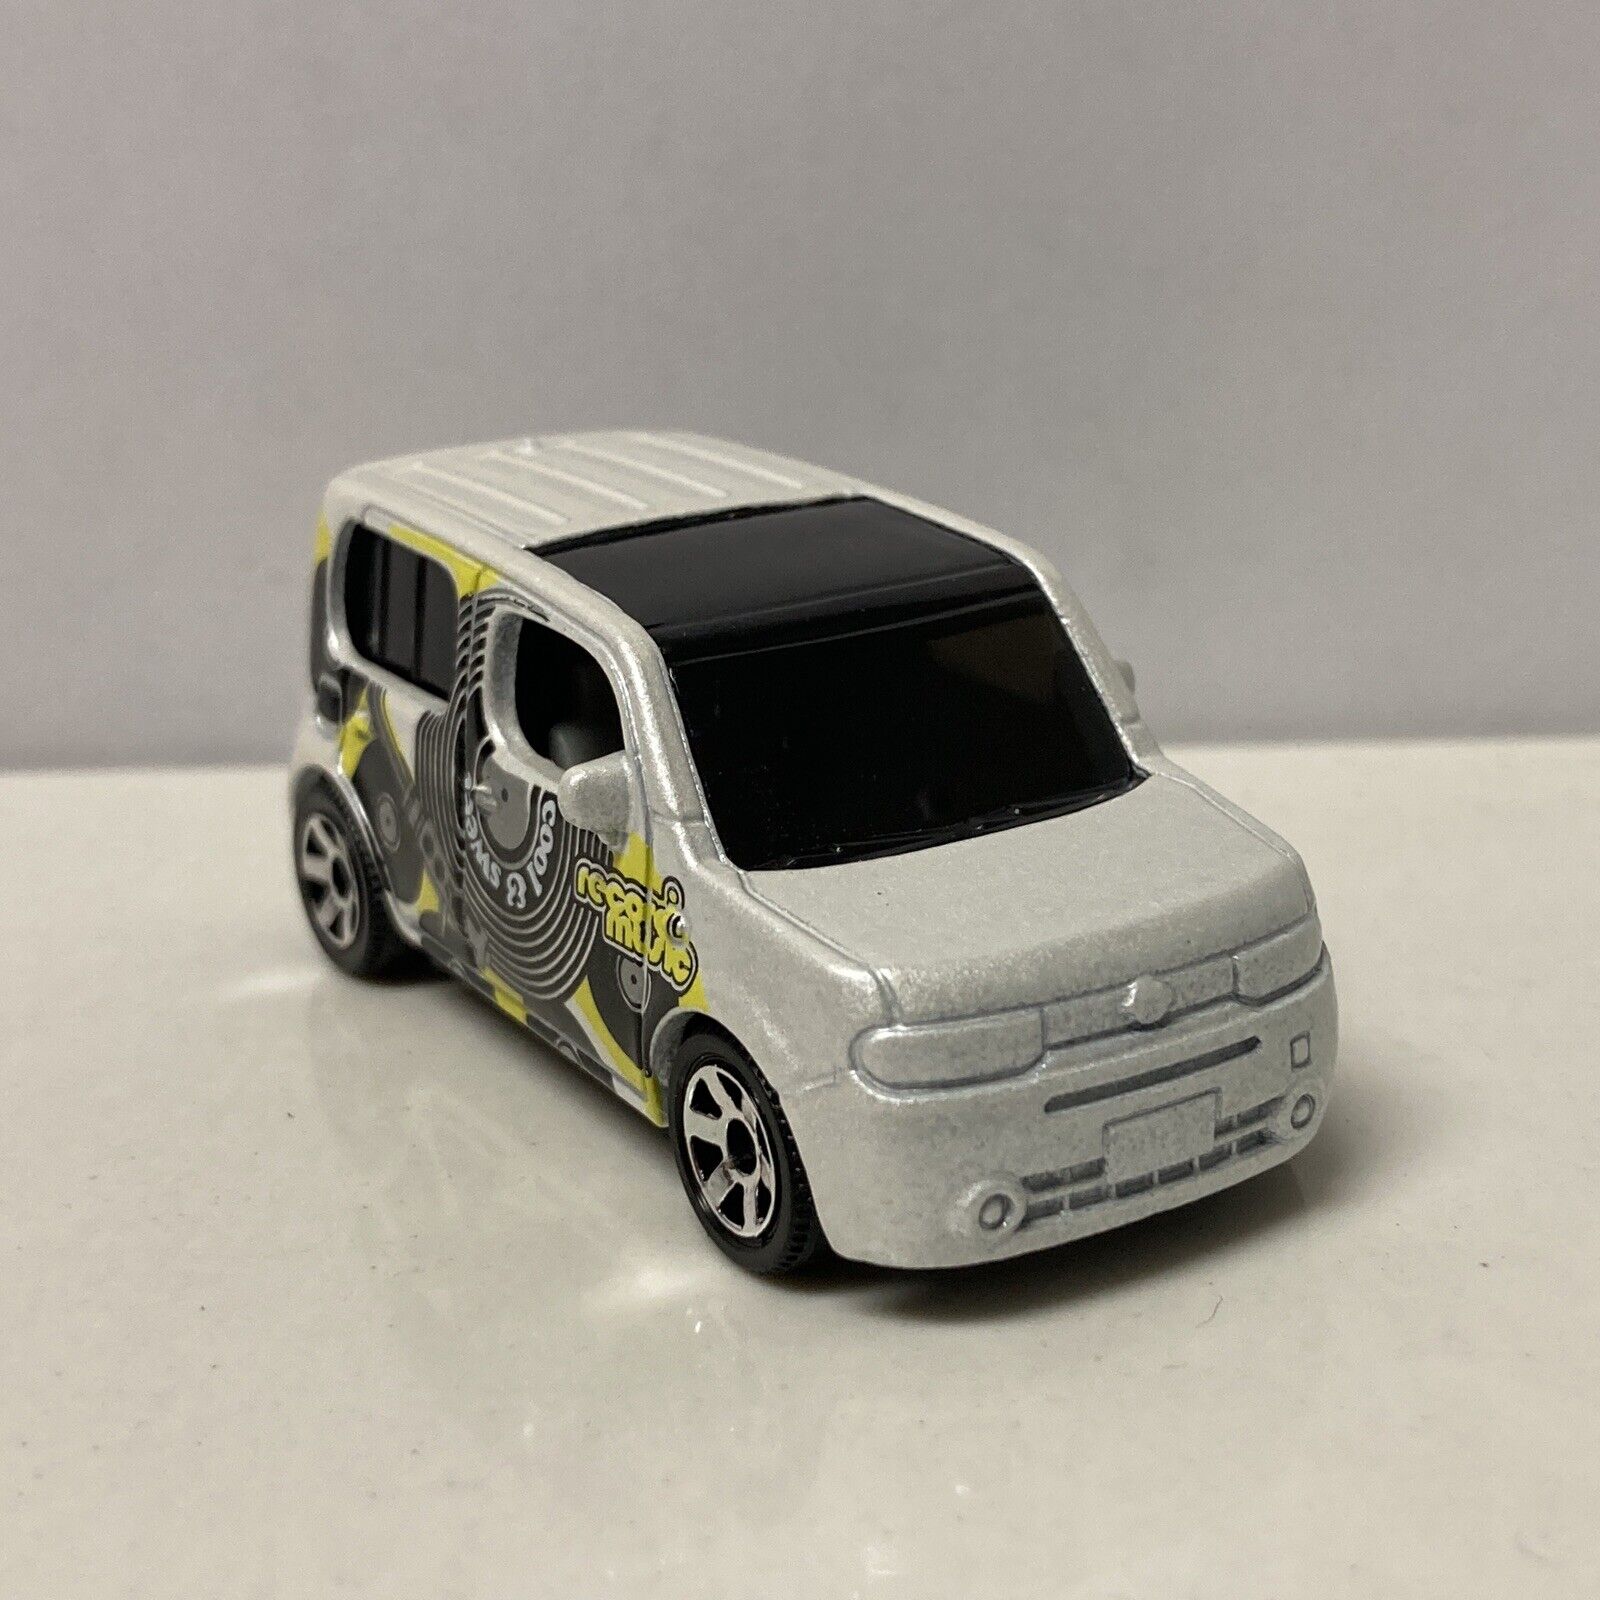 2010 10 Nissan Cube Collectible 1/64 Scale Diecast Diorama Model | eBay